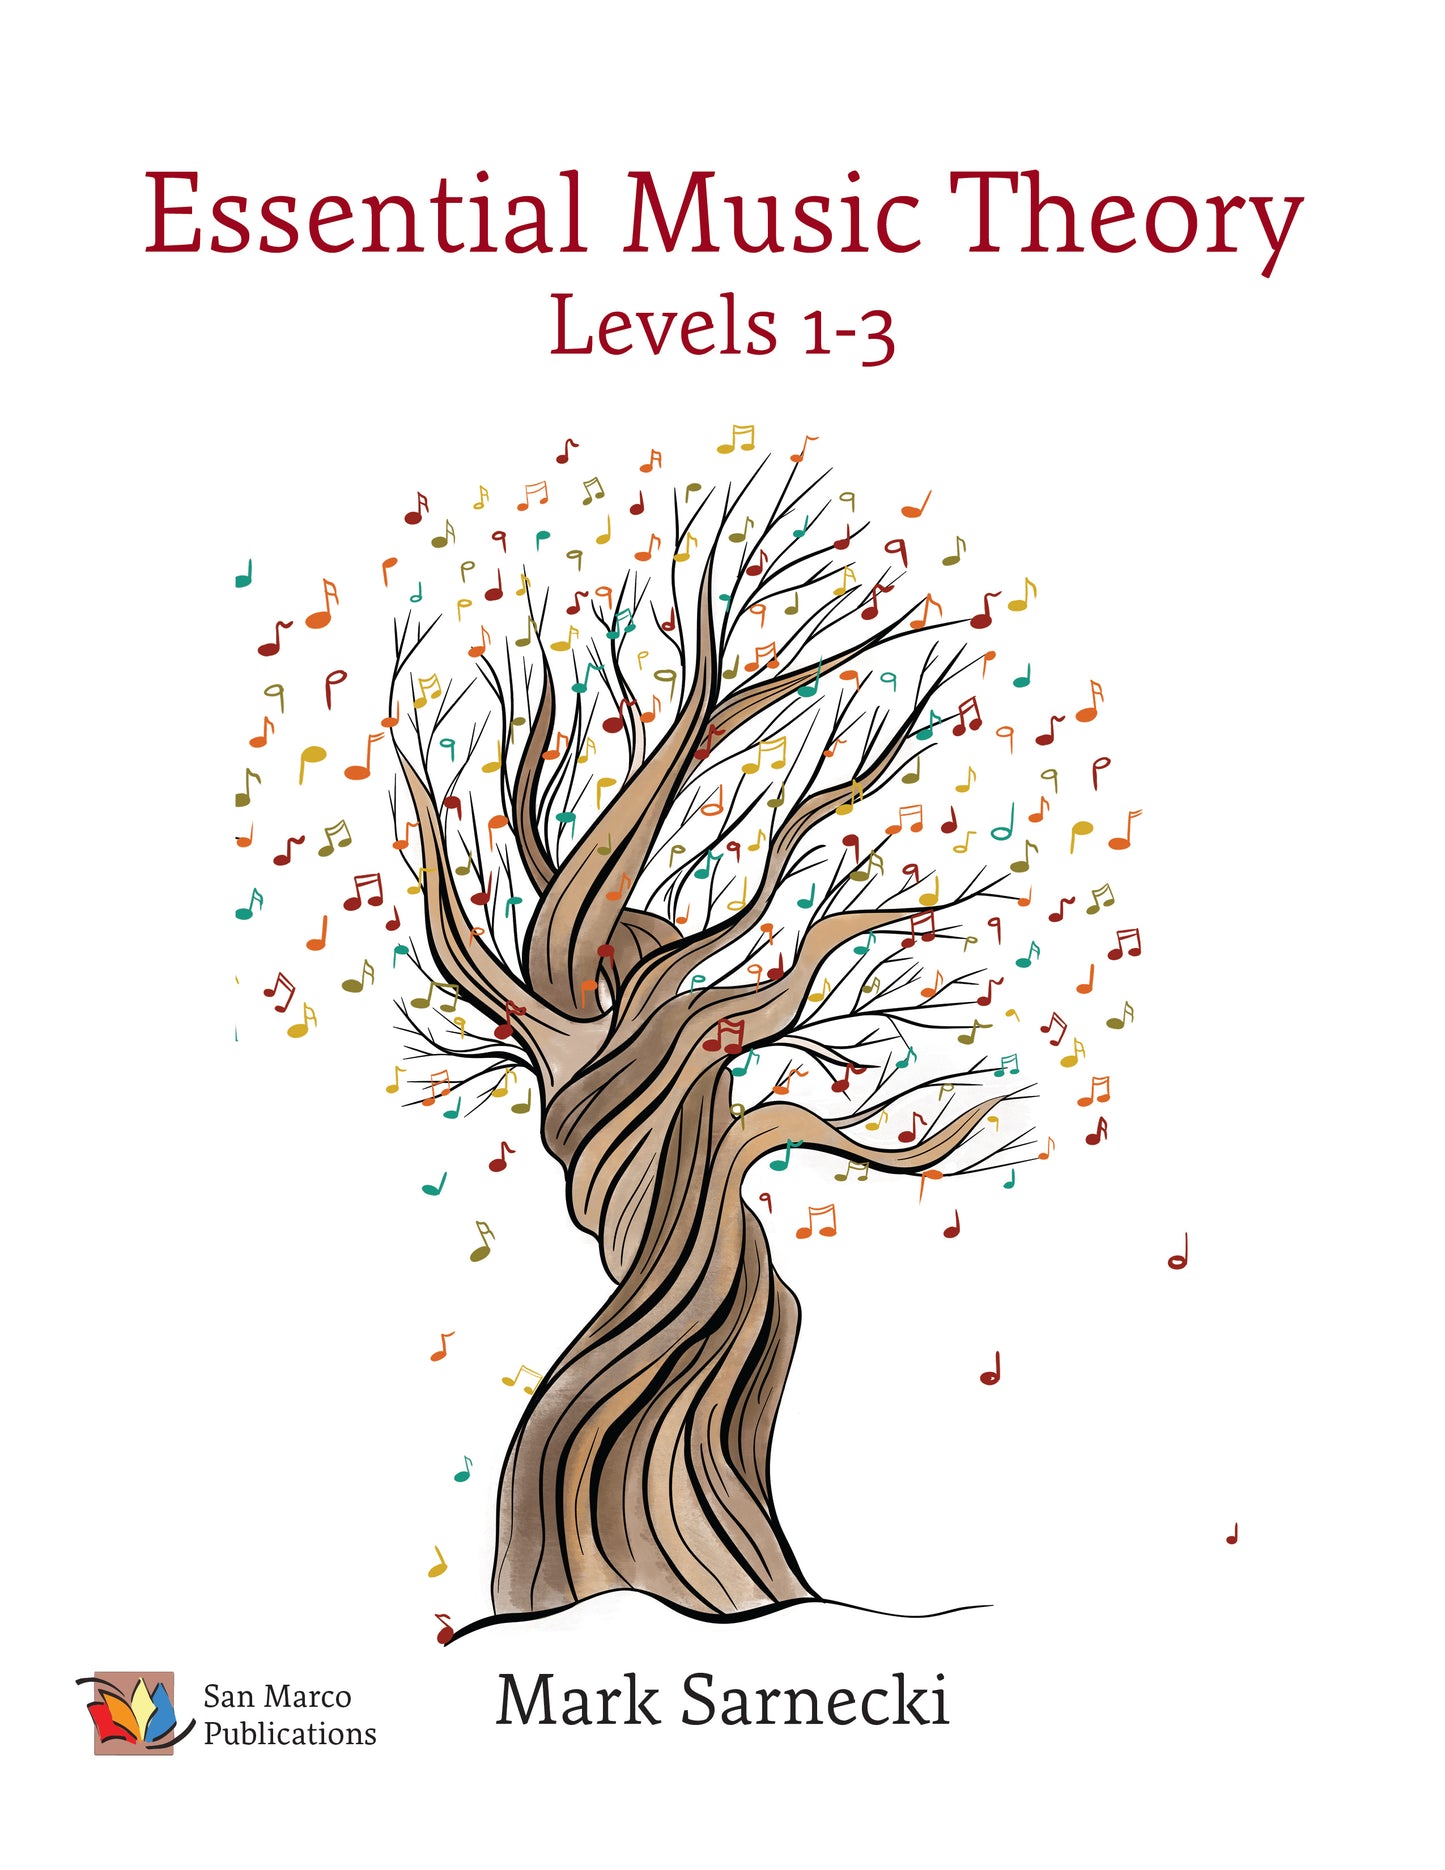 Essential Music Theory Levels 1-3